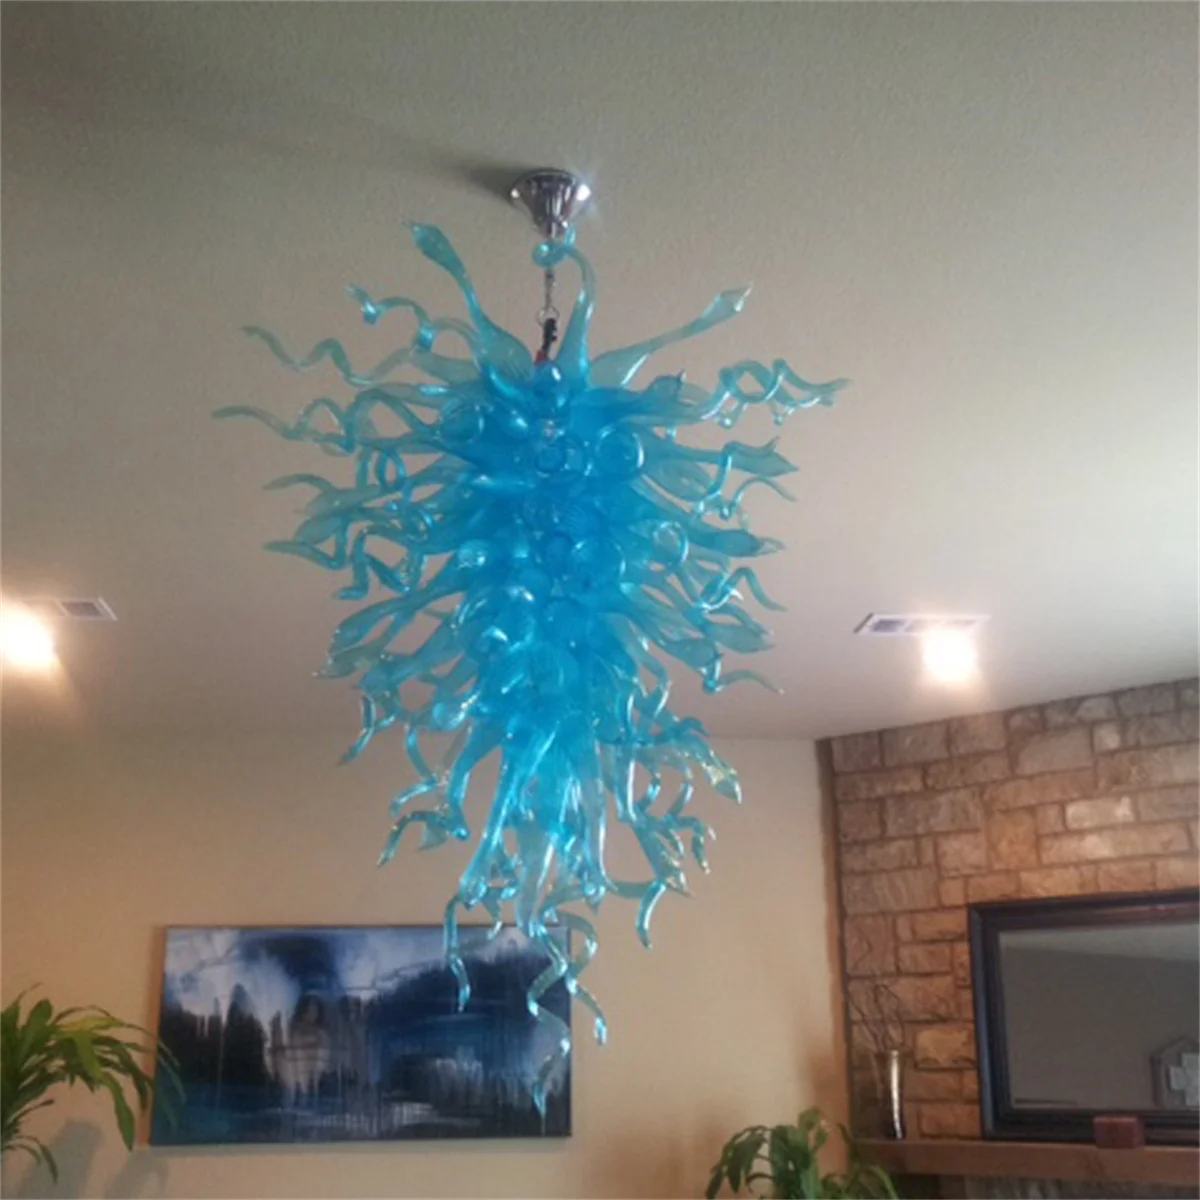 

Turquoise Chandeliers Pendant Lighting New Arrival Energy Saving Hand Blown Chandelier Glass Art Designs for Home Living Room